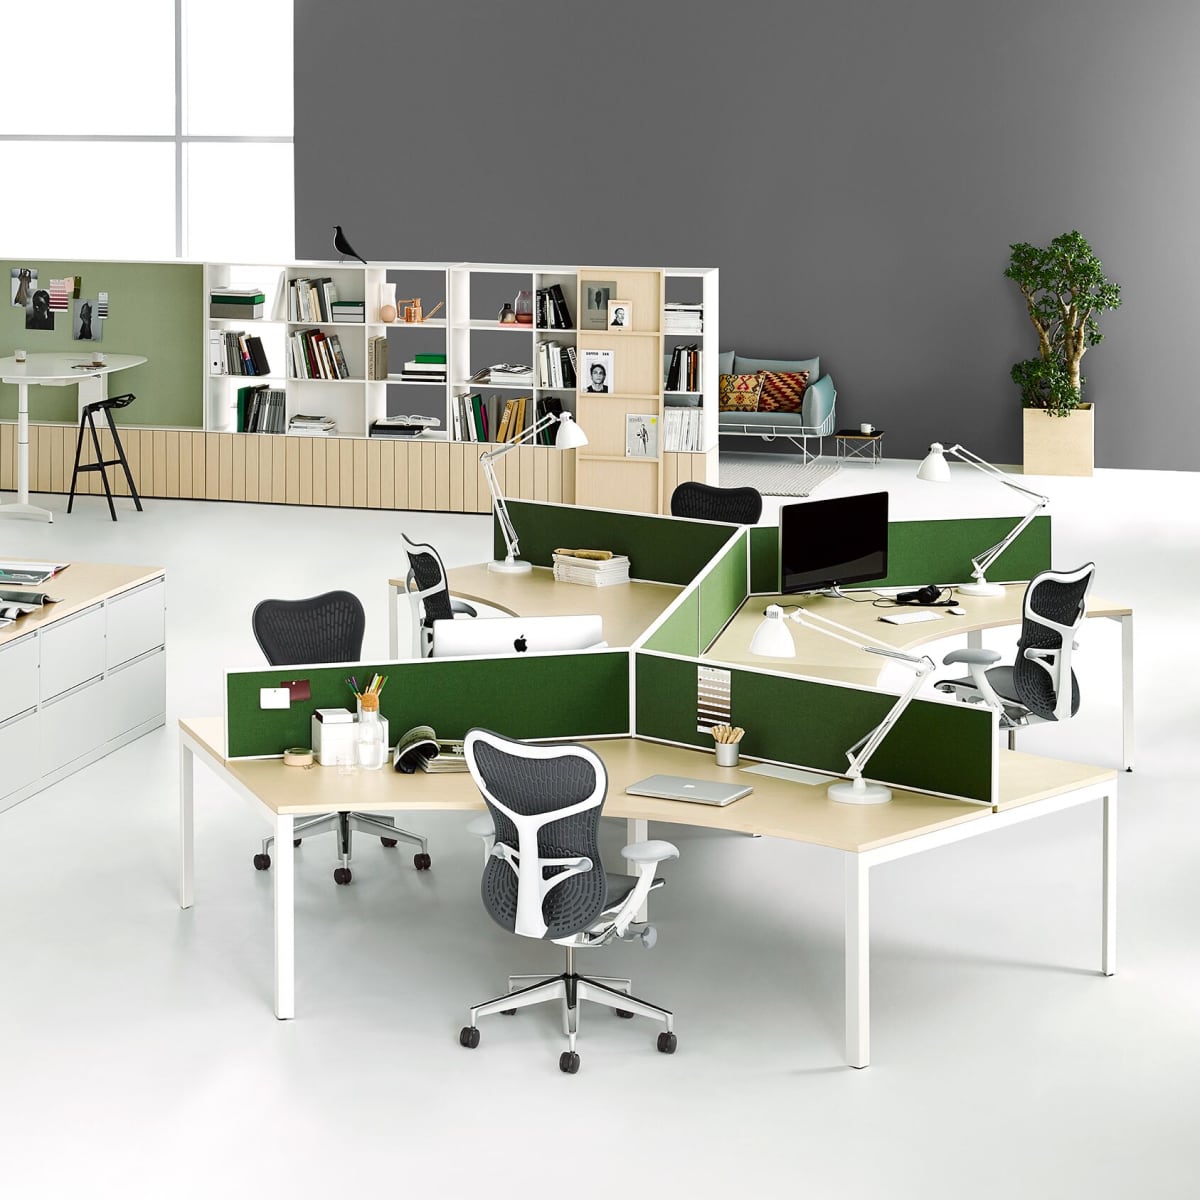 Workstations with green privacy screens and dark blue Mirra 2 office chairs.